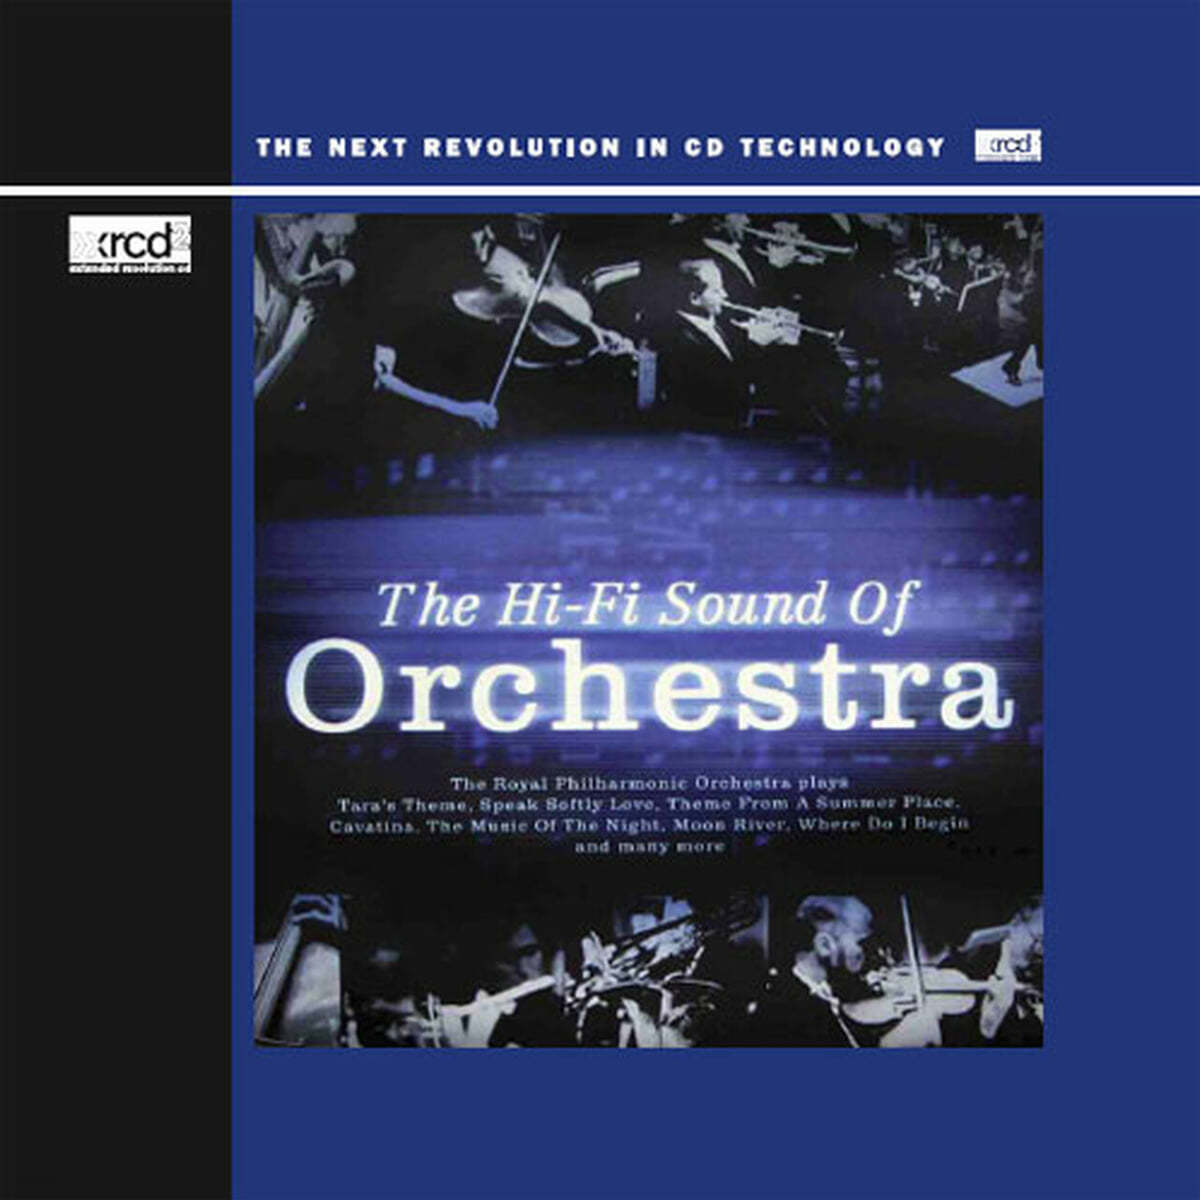 The Royal Philharmonic Orchestra 하이파이 사운드 오브 오케스트라 (The Hi-Fi Sound Of Orchestra)